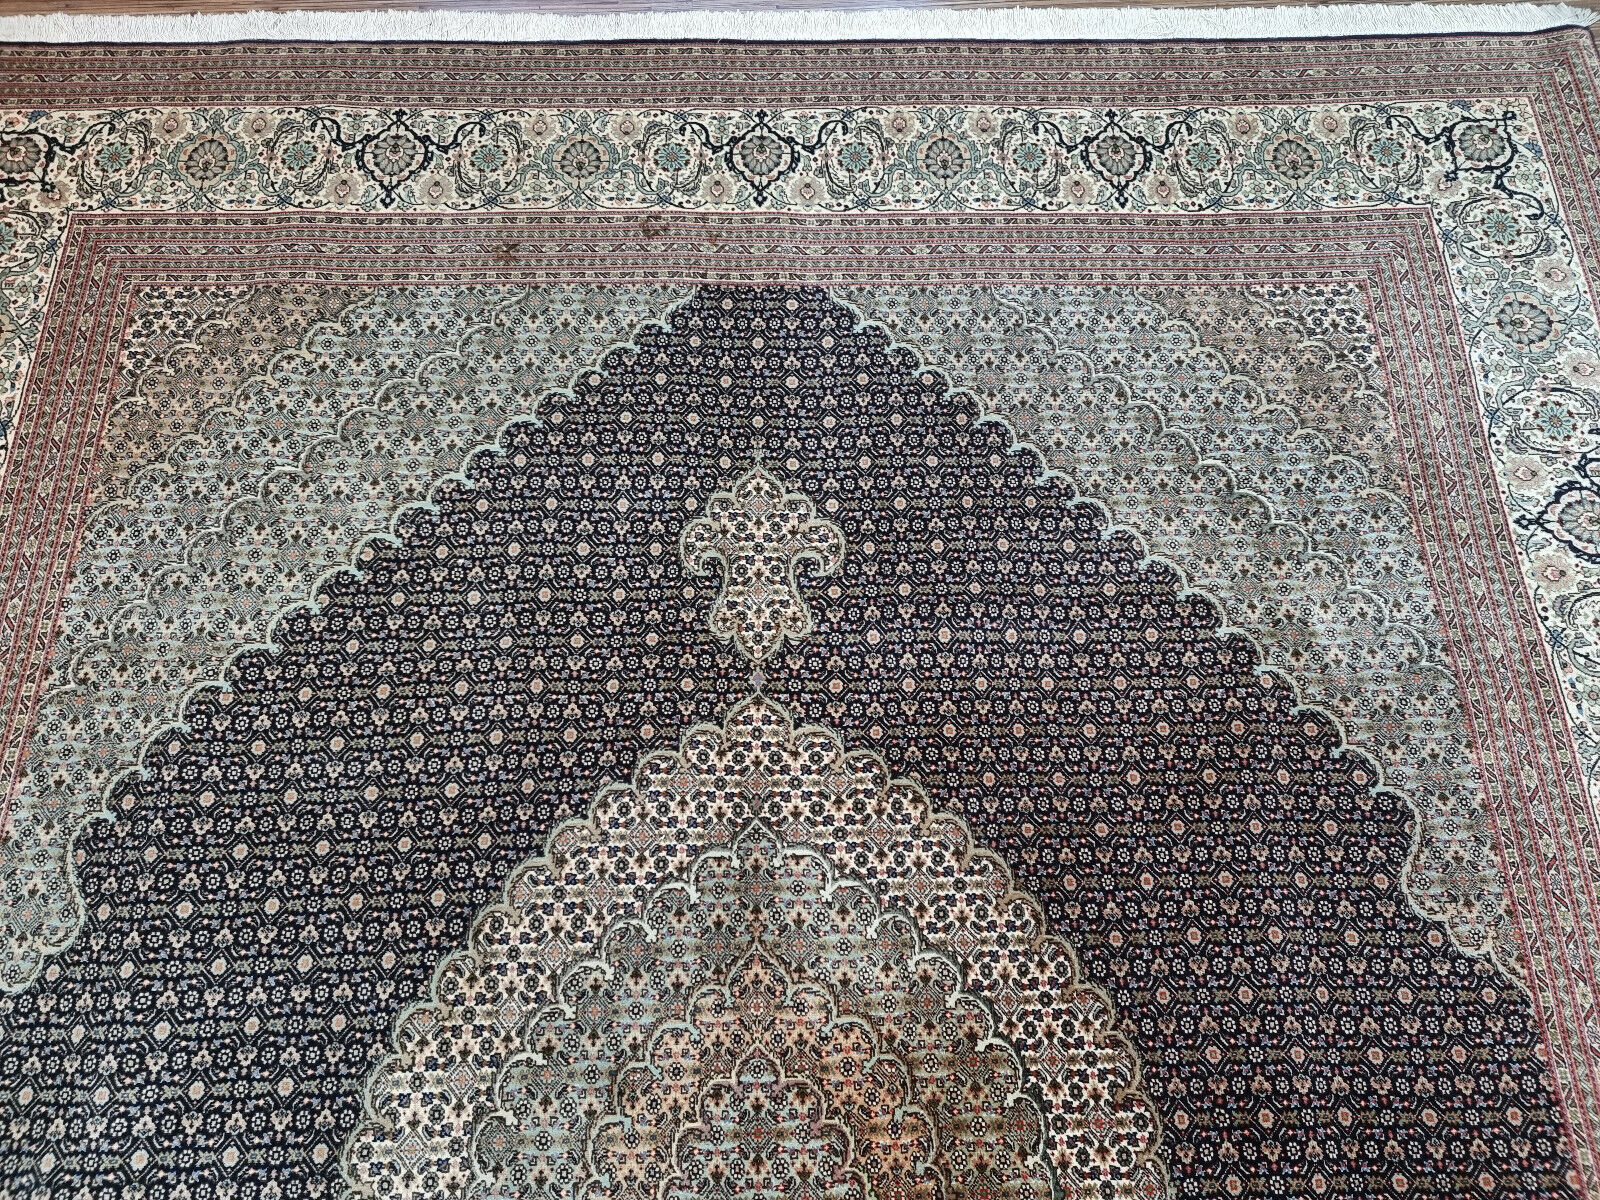 Close-up of the muted tones and variations due to age and wear on the rug